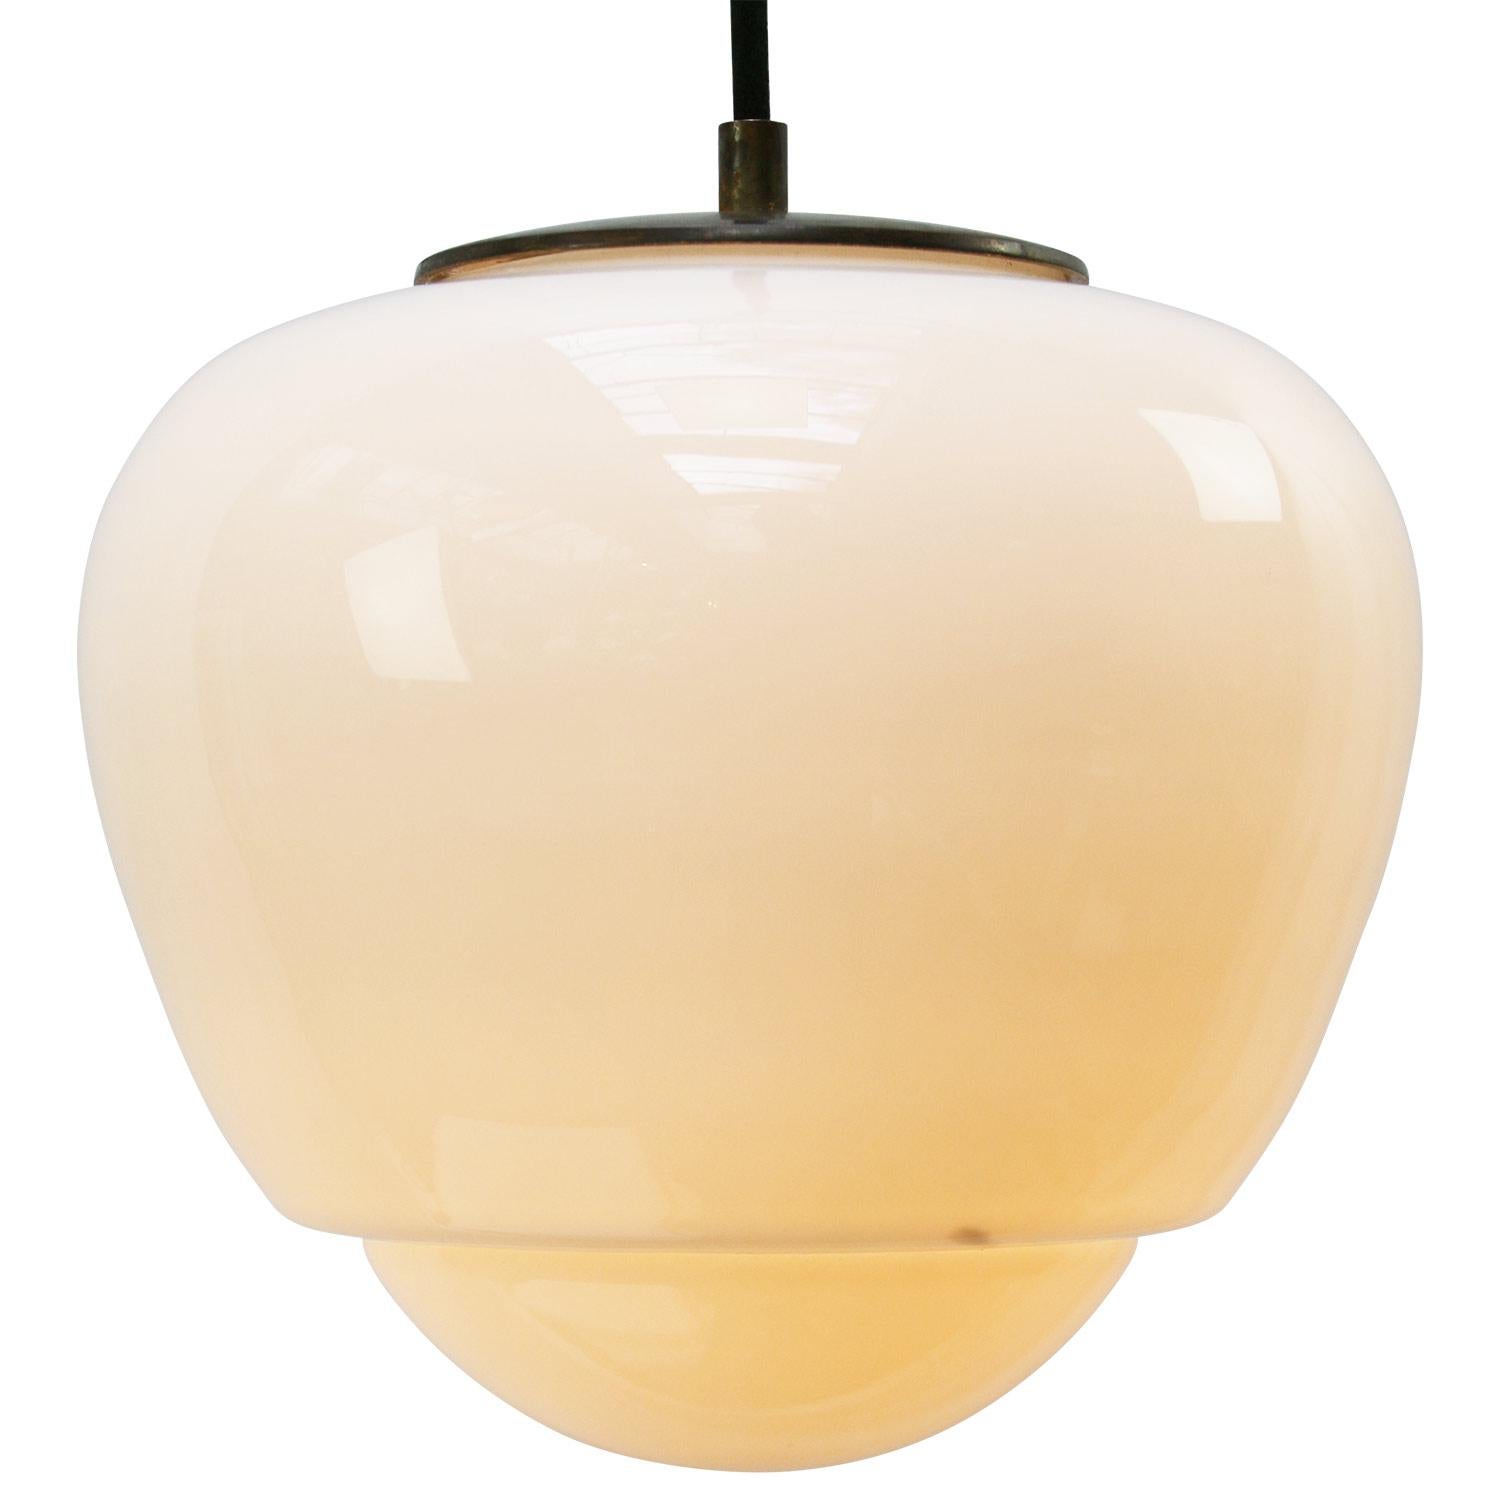 Opaline glass pendant.
2 meter Black wire

Weight: 2.00 kg / 4.4 lb

Priced per individual item. All lamps have been made suitable by international standards for incandescent light bulbs, energy-efficient and LED bulbs. E26/E27 bulb holders and